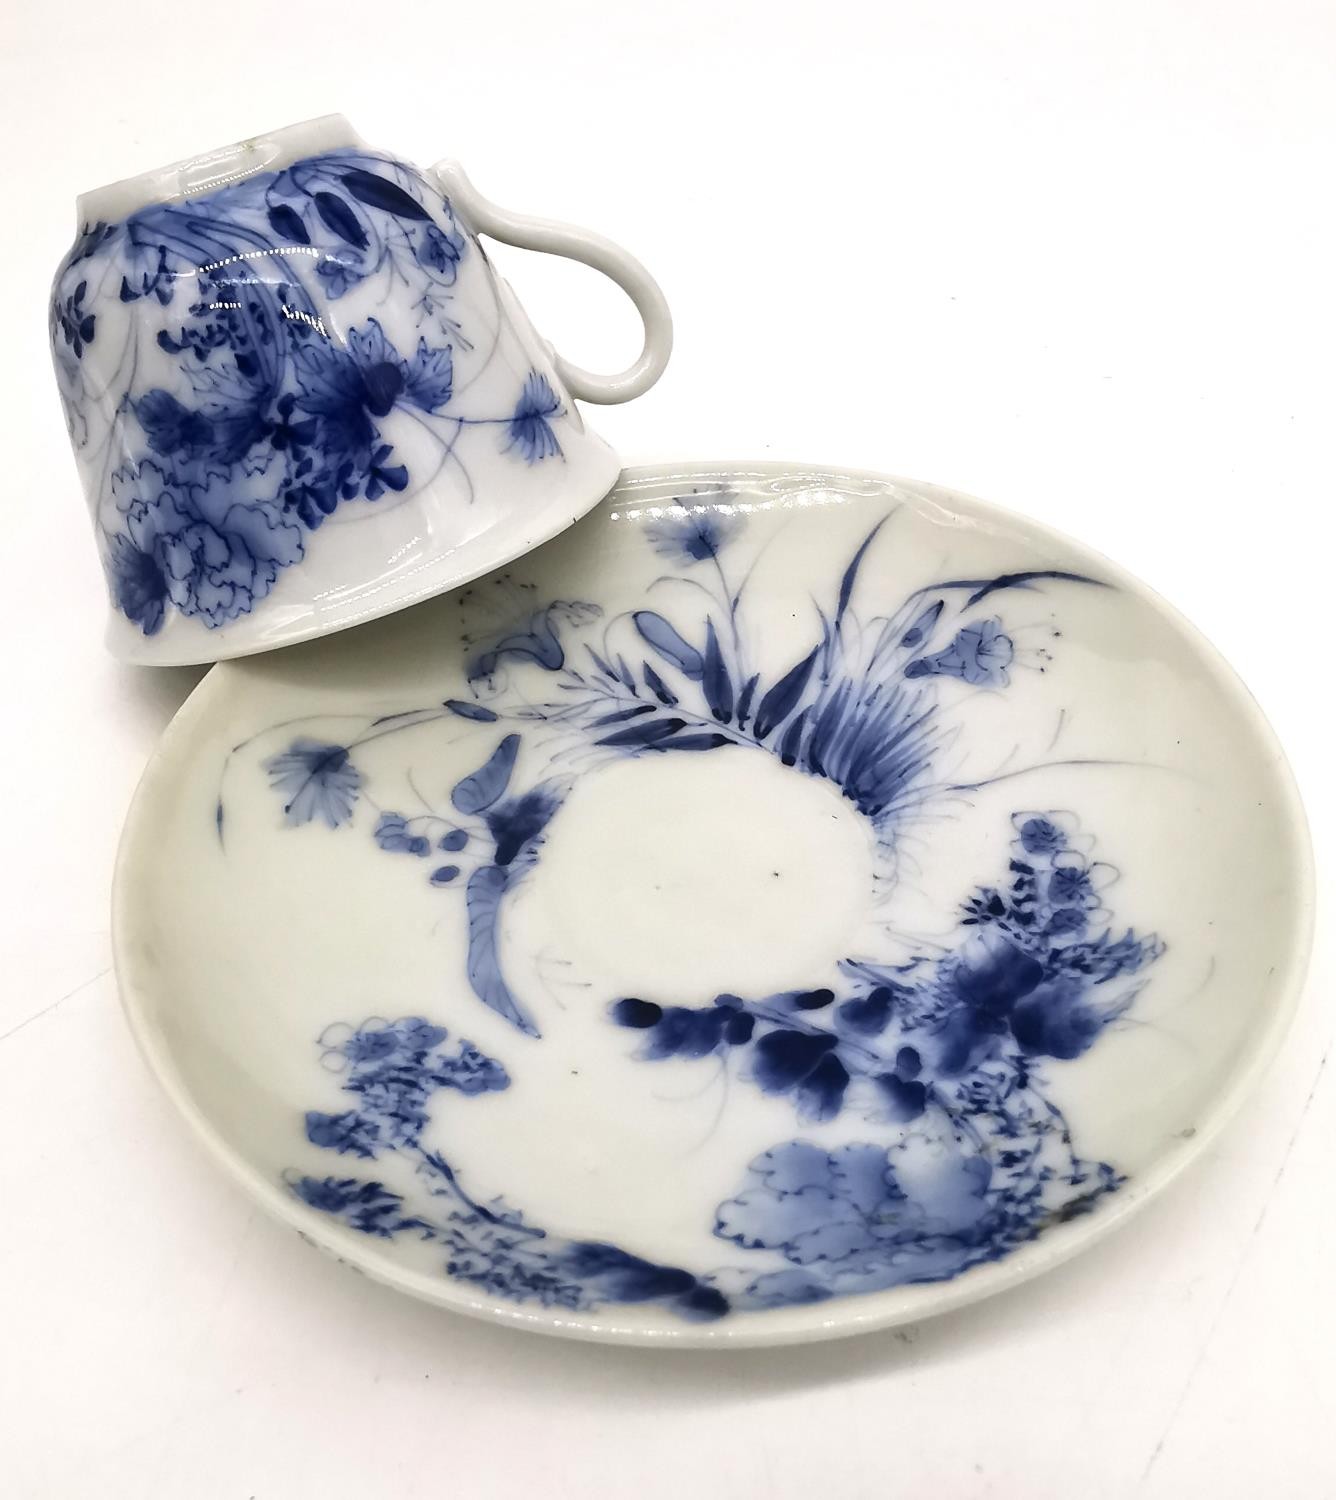 A Japanese 19th century hand painted porcelain small blue and white floral and foliate design teacup - Image 6 of 9